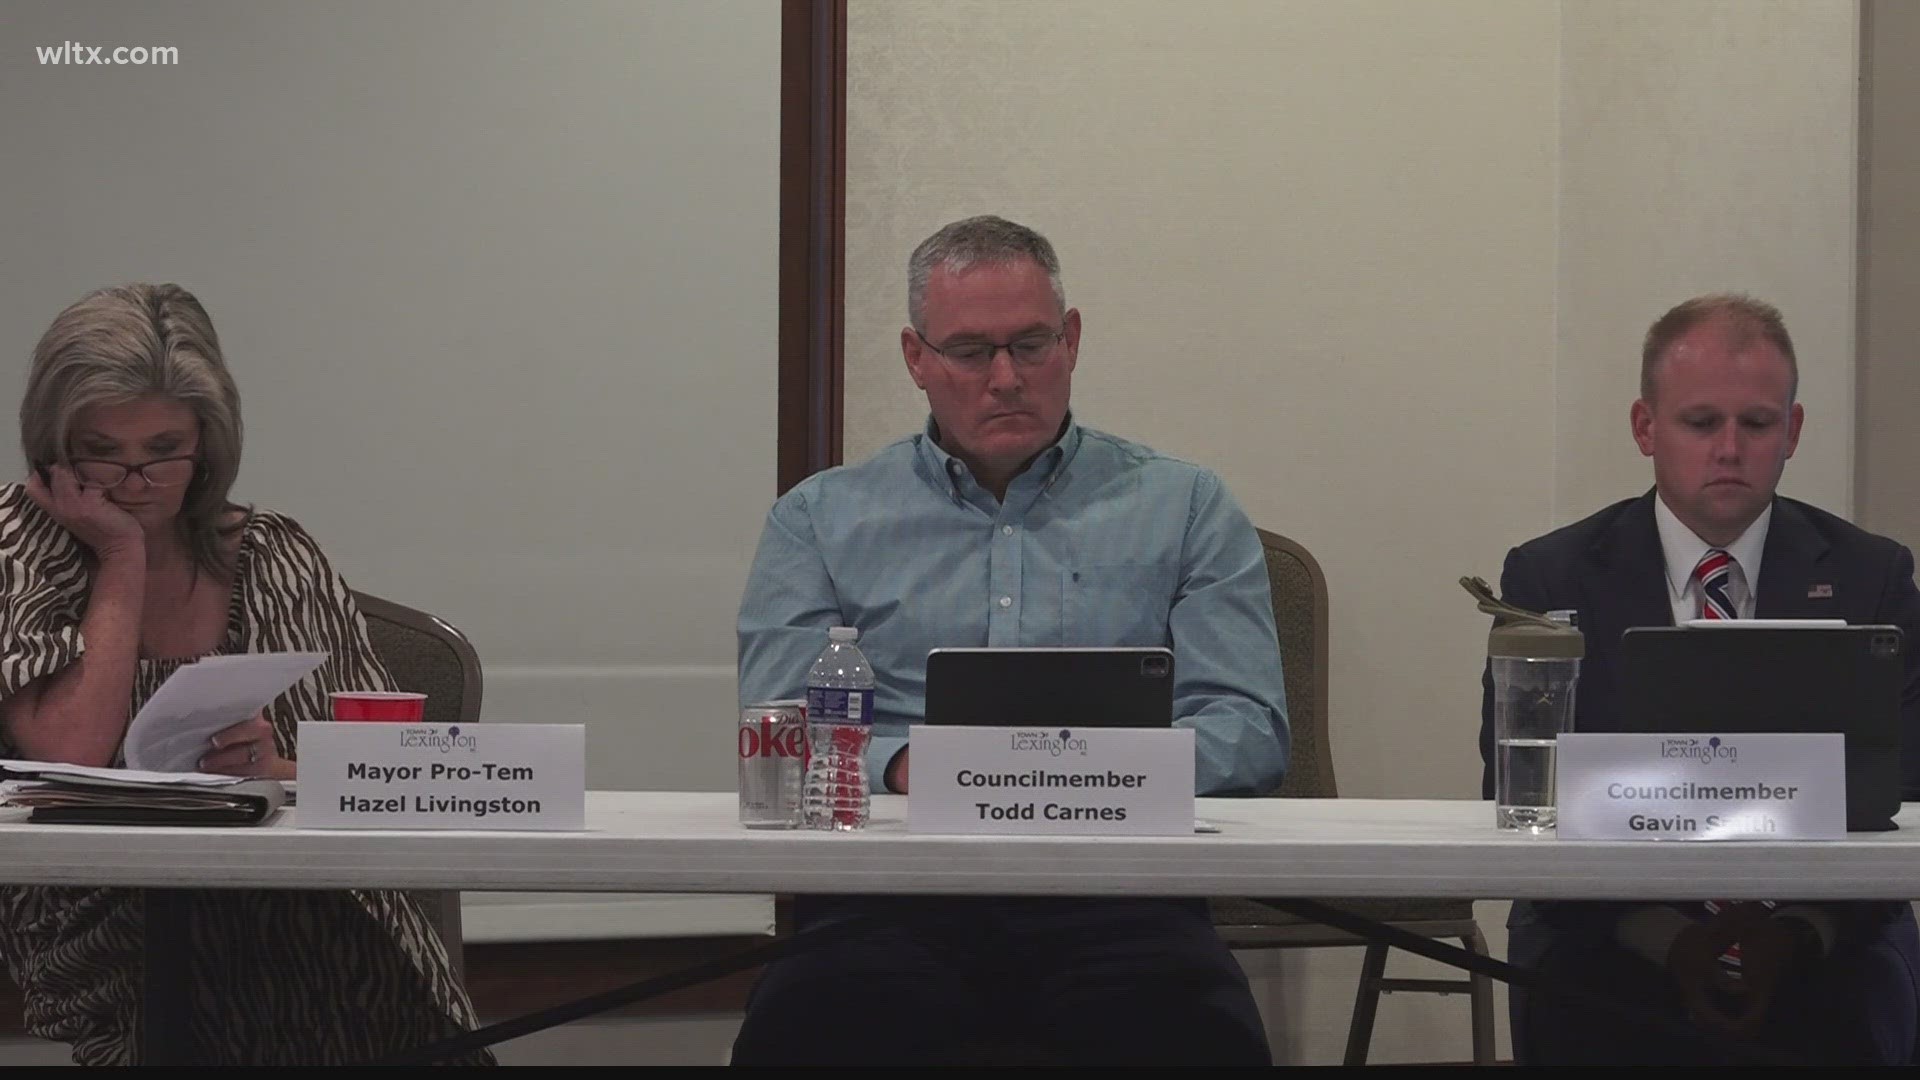 An emergency ordinance has been passed in the Town of Lexington to allow the council to explore its options when it comes to taking care of a sewer line failure.